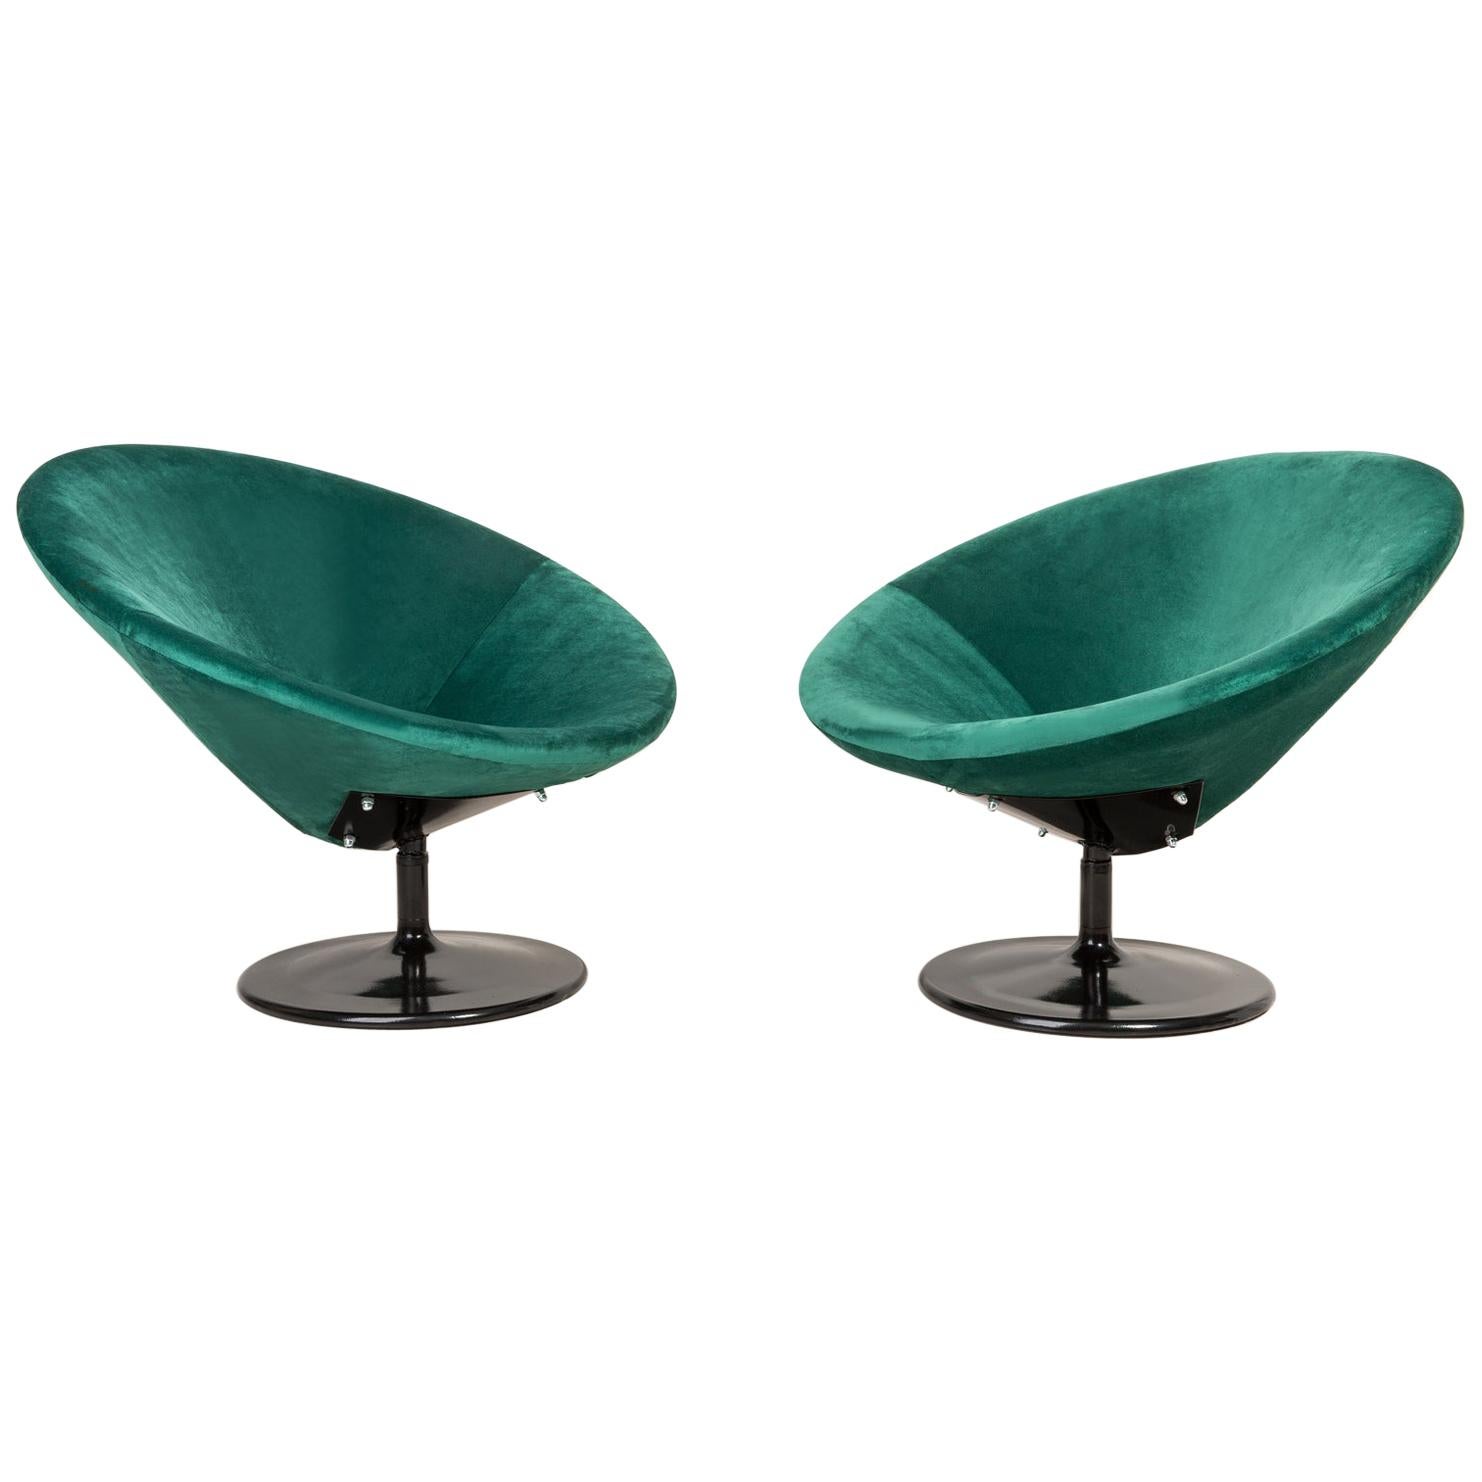 Set of two swivel armchairs from the 1970s, produced in the Silesian furniture factory in Swiebodzin - at the moment they are unique. Due to their dimensions, they perfectly blend in even in small apartments providing comfort and beautiful